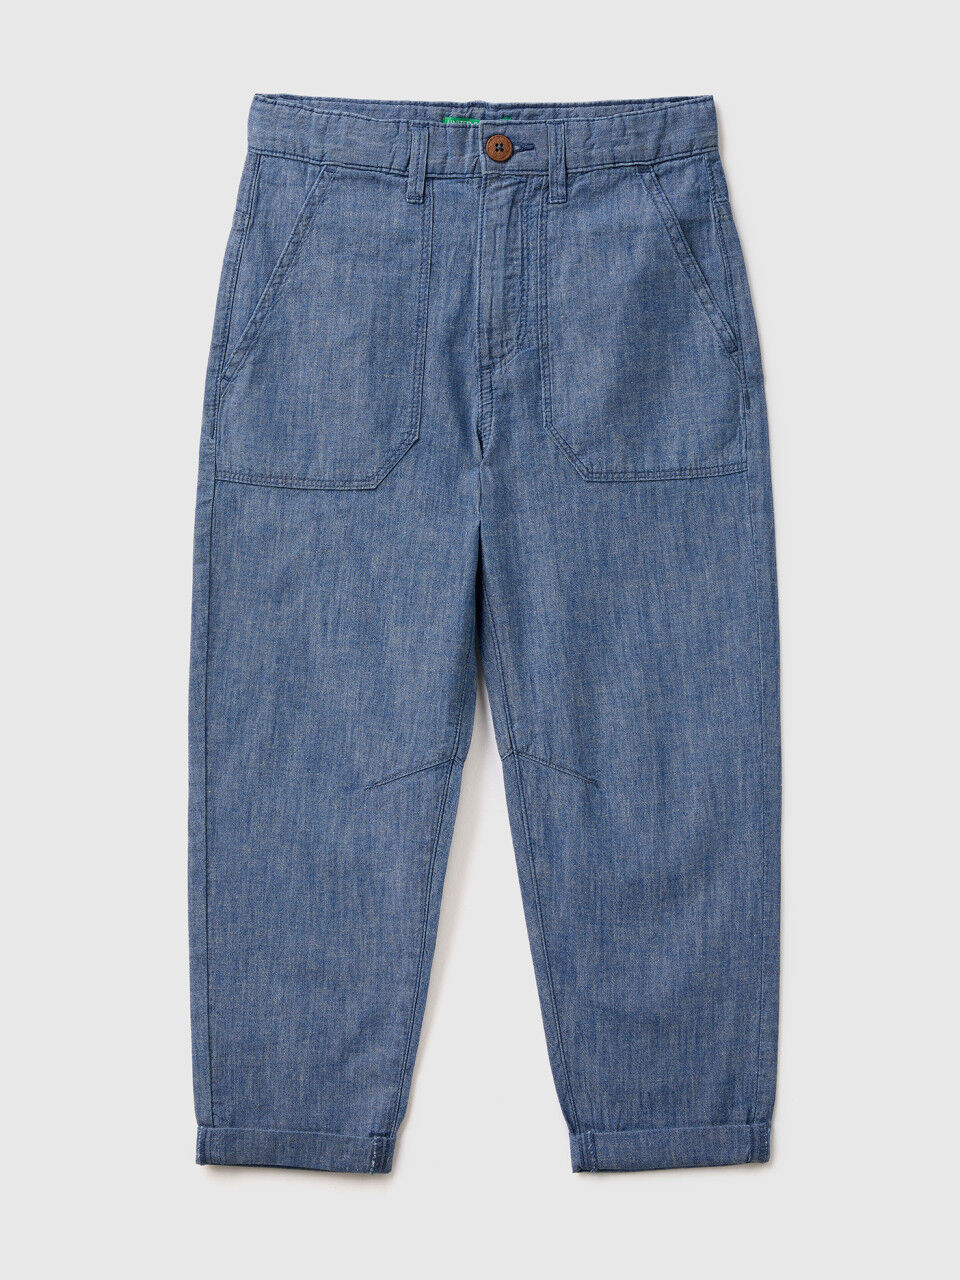 Trousers in linen blend chambray